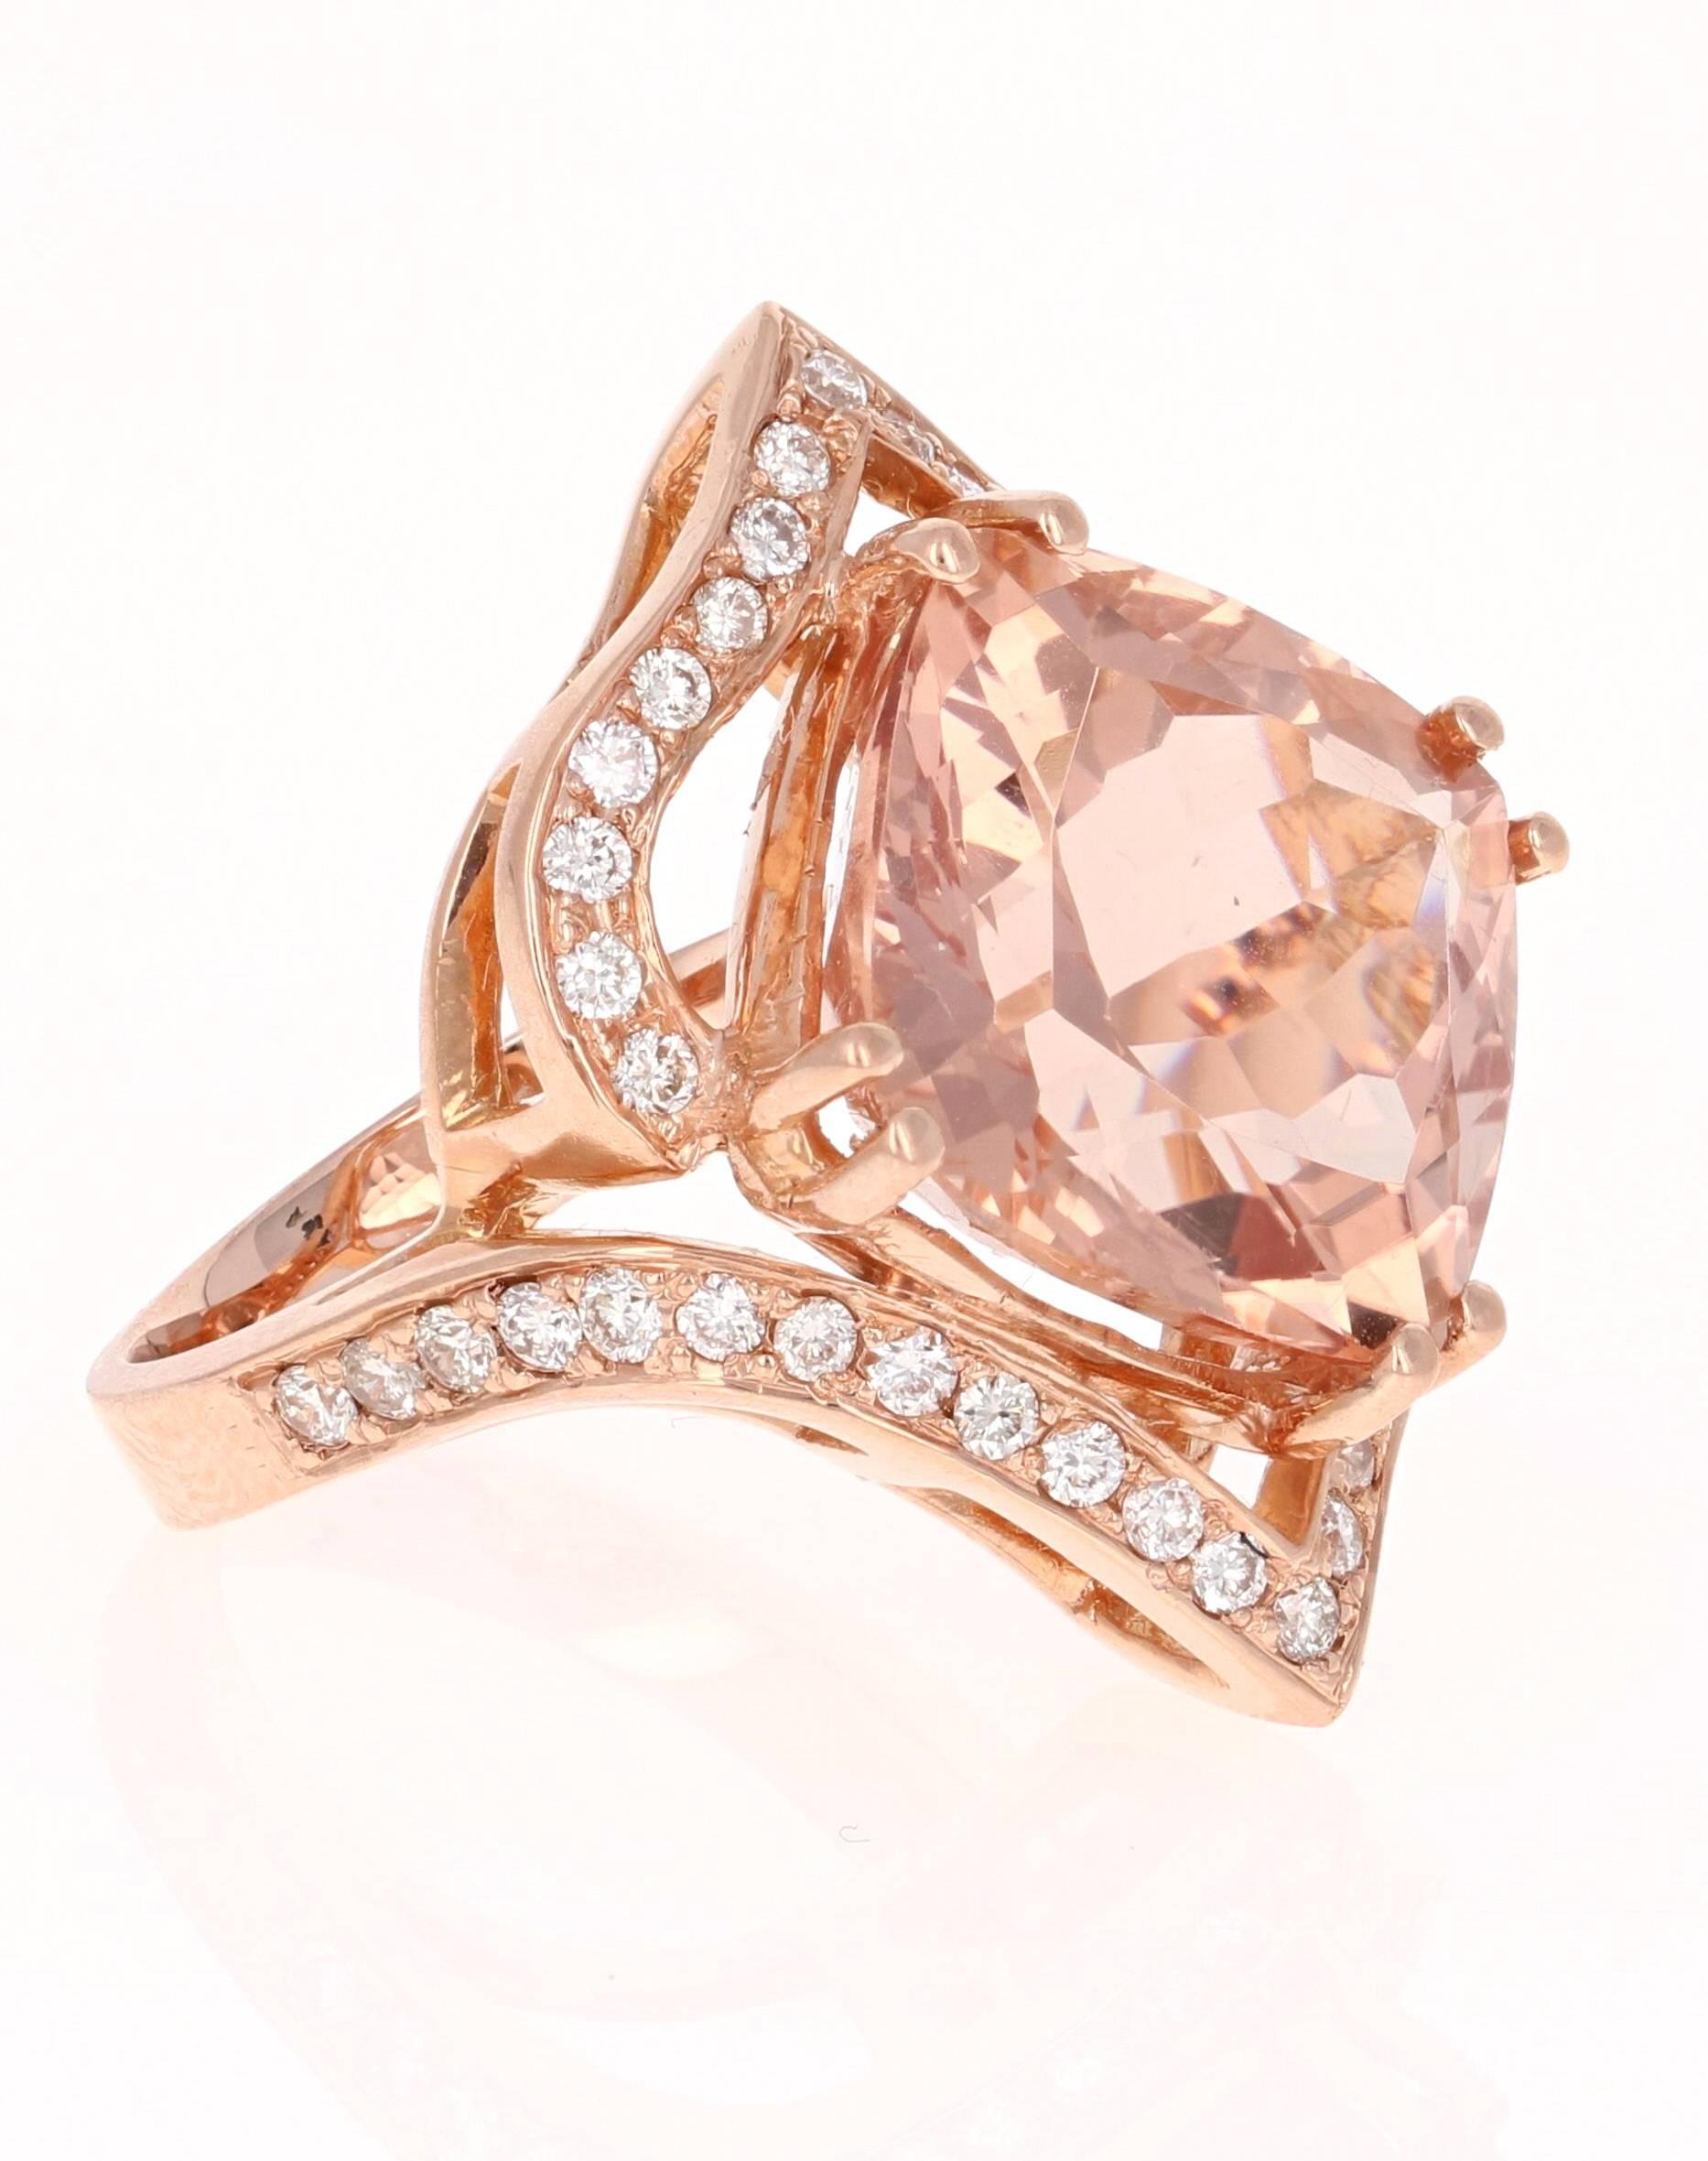 A gorgeous cocktail ring that is sure to stir up some real conversation at the next party! This ring has a huge 13.43 carat Morganite in the center of the ring and is surrounded by 42 Round Cut Diamonds that weigh 0.81 carat (Clarity: VS2, Color: H)